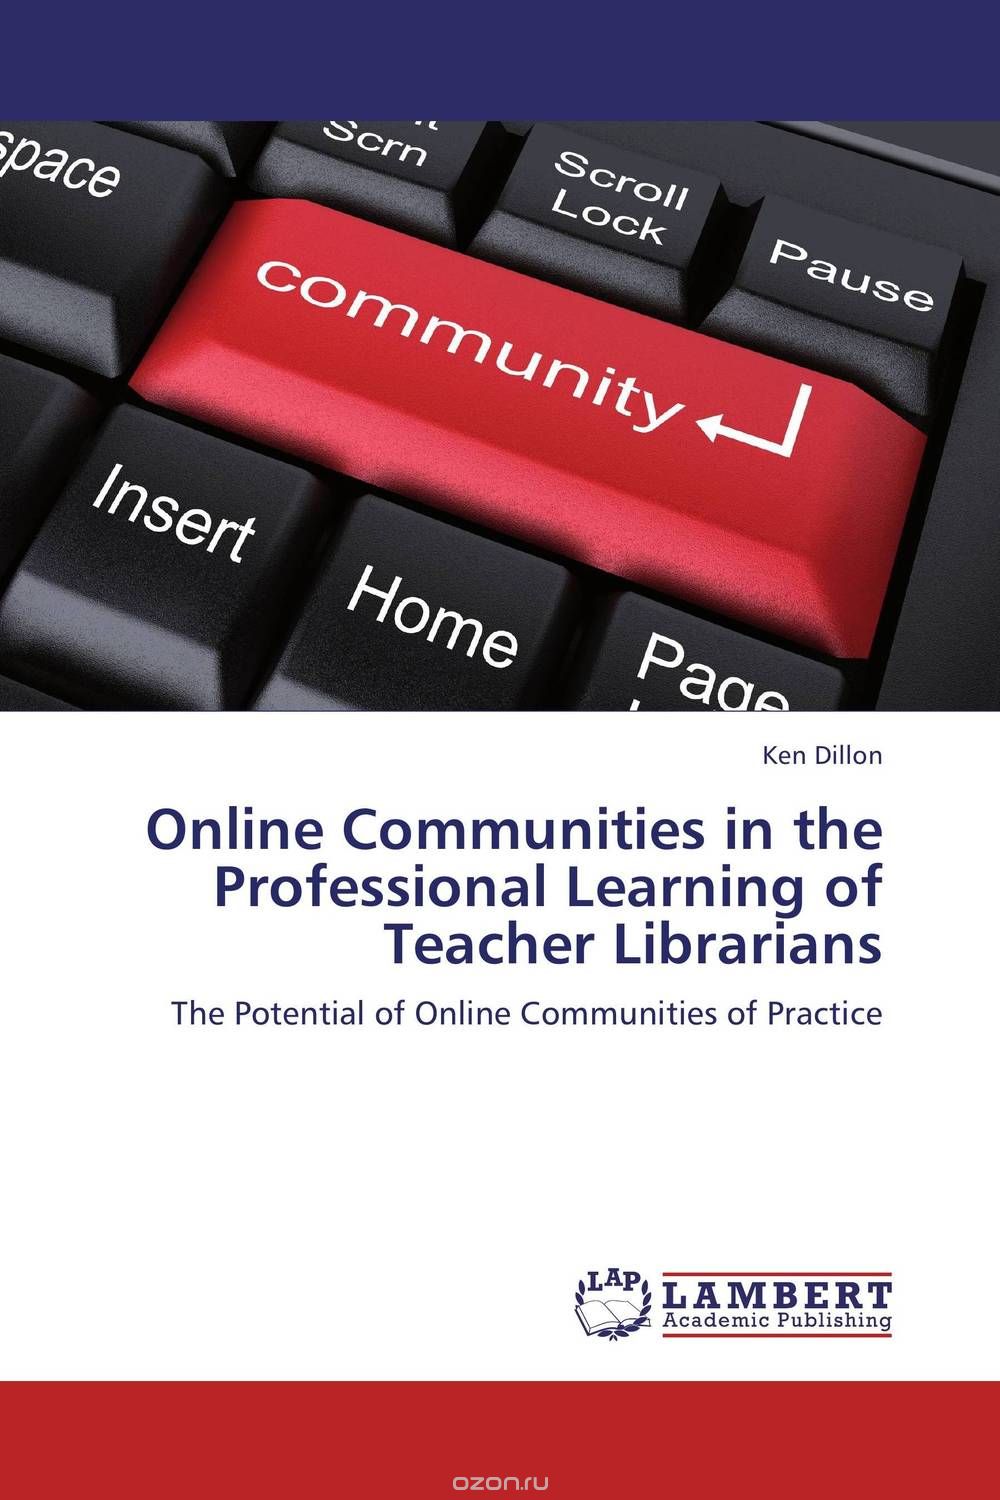 Скачать книгу "Online Communities in the Professional Learning of Teacher Librarians"